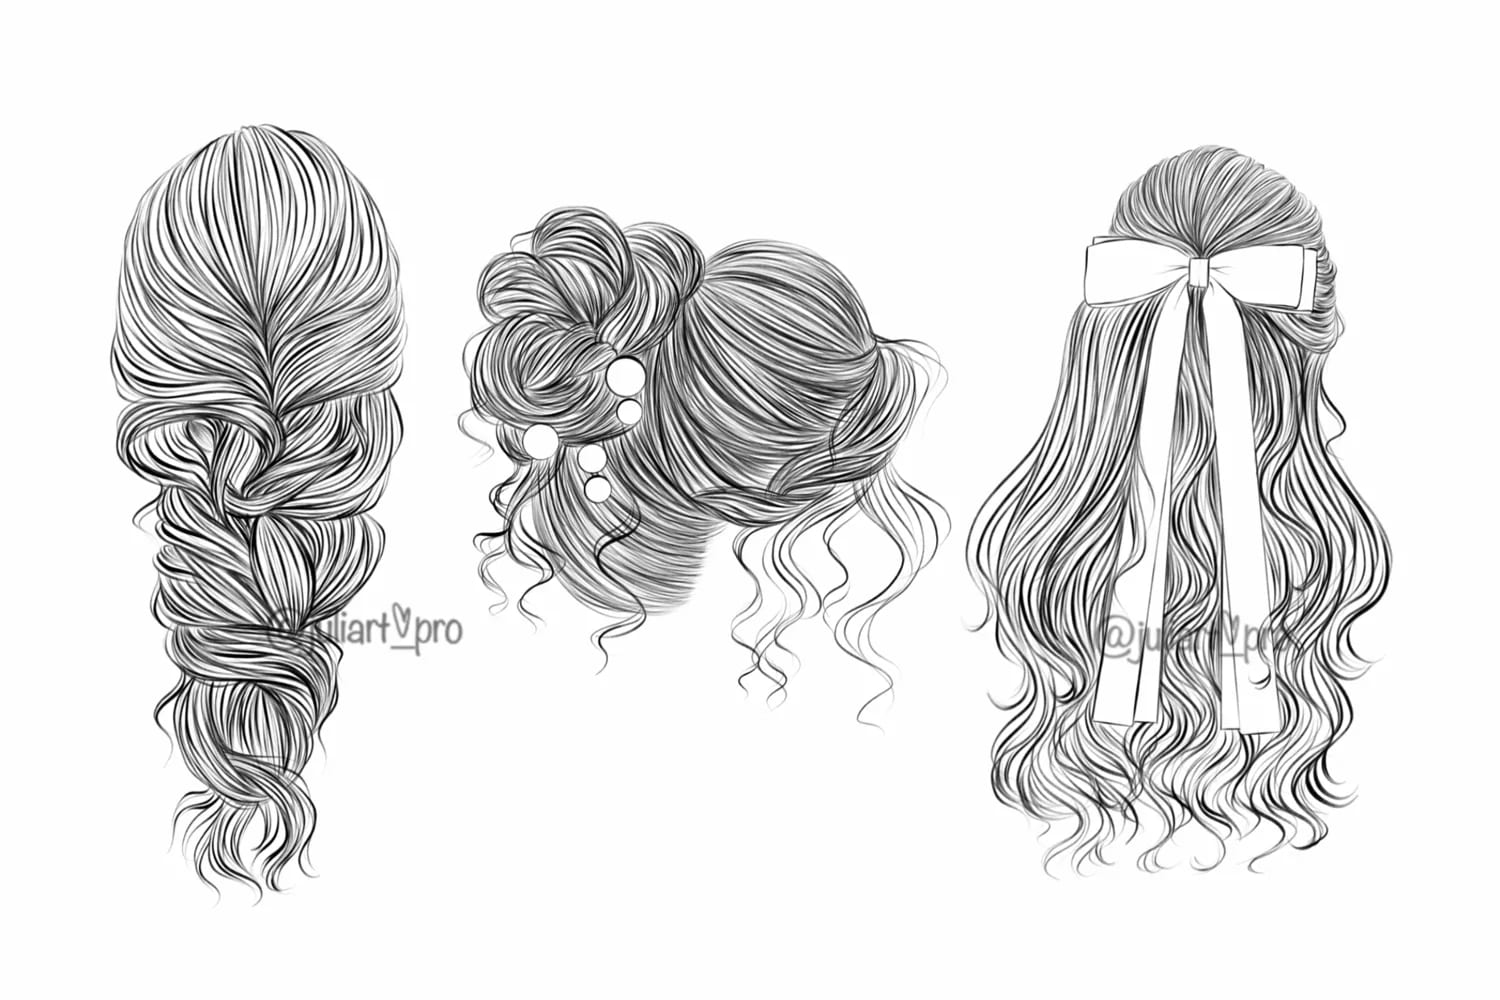 Drawing of three different styles of hair.